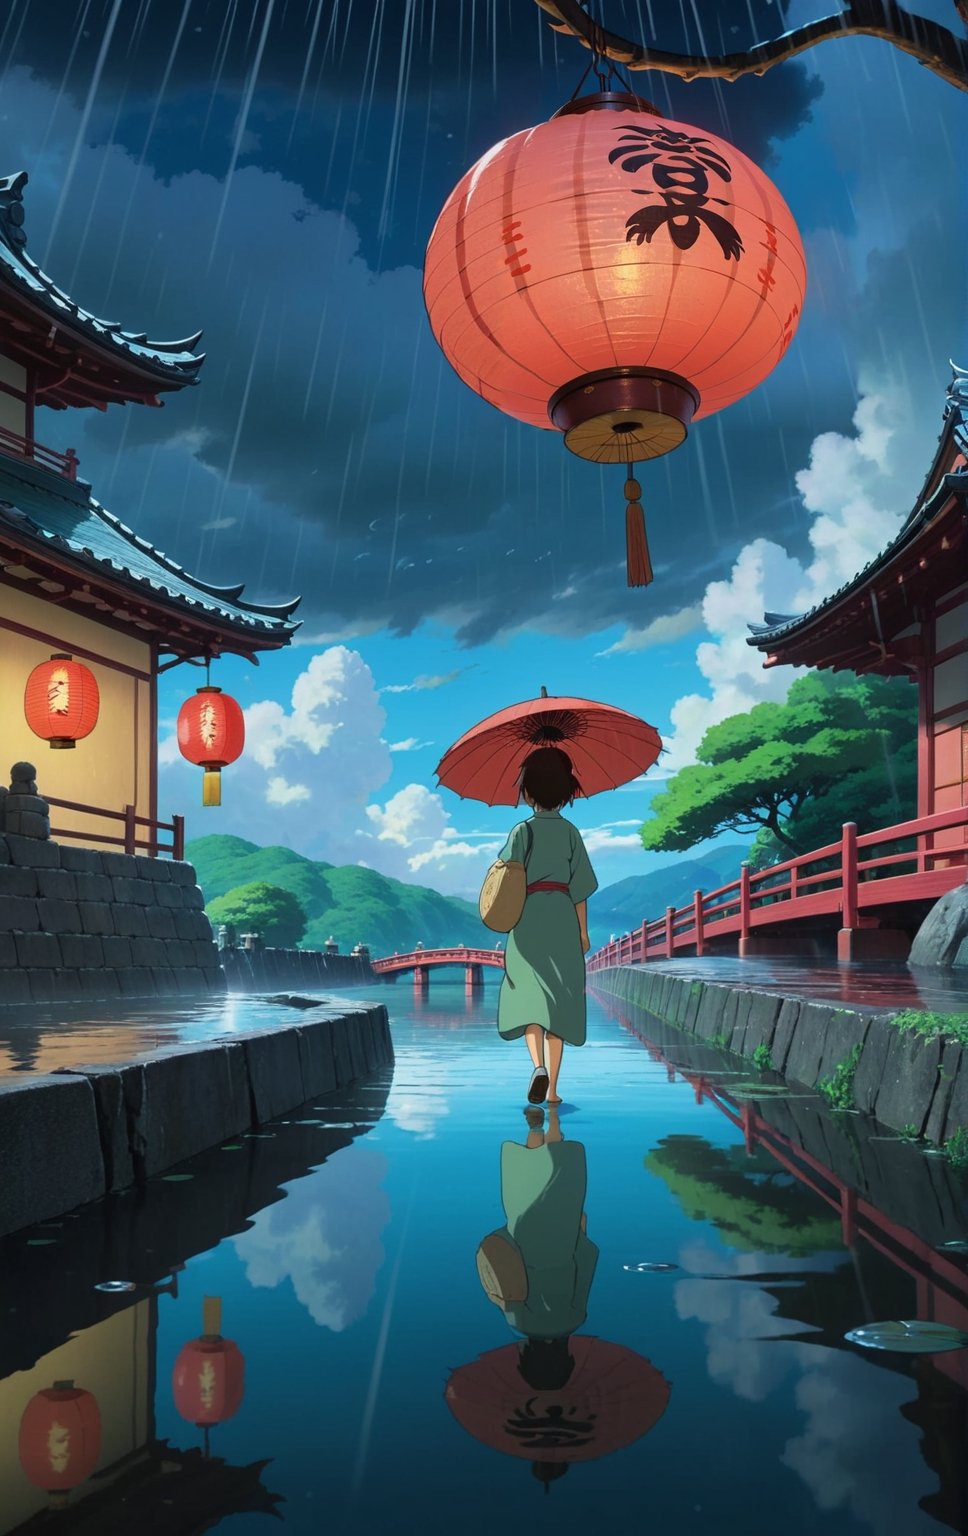 ((Movie poster in 4K resolution, style inspired by Studio Ghibli, focusing on vibrant colors, delicate details and magical atmosphere)). | A stunning poster for "Spirited Away", featuring the young protagonist Chihiro and the dragon Haku in a night scene with heavy rain. Chihiro is staring into the distance with determination, while Haku hovers protectively above her in dragon form. | The setting is a traditional Japanese public bath, with thatched roofs, wooden walls and paper lanterns, now wet from heavy rain. The iconic red bridge stands out in the background. | The composition follows the rule of thirds, with Chihiro and Haku positioned at the points of intersection. The "Spirited Away" movie logo is positioned at the top, with the 4K icon in the bottom right corner. | Dramatic lighting effects and water reflections enhance the beauty of the night and rainy scene. | An emotional poster for "Spirited Away", featuring Chihiro and the dragon Haku on a night of torrential rain. | ((perfect_composition, perfect_design, perfect_layout, perfect_detail, ultra_detailed, enhance_details, correct_imperfections)), ((More Detail, Enhance)), Enhanced All,ghibli,Enhanced All